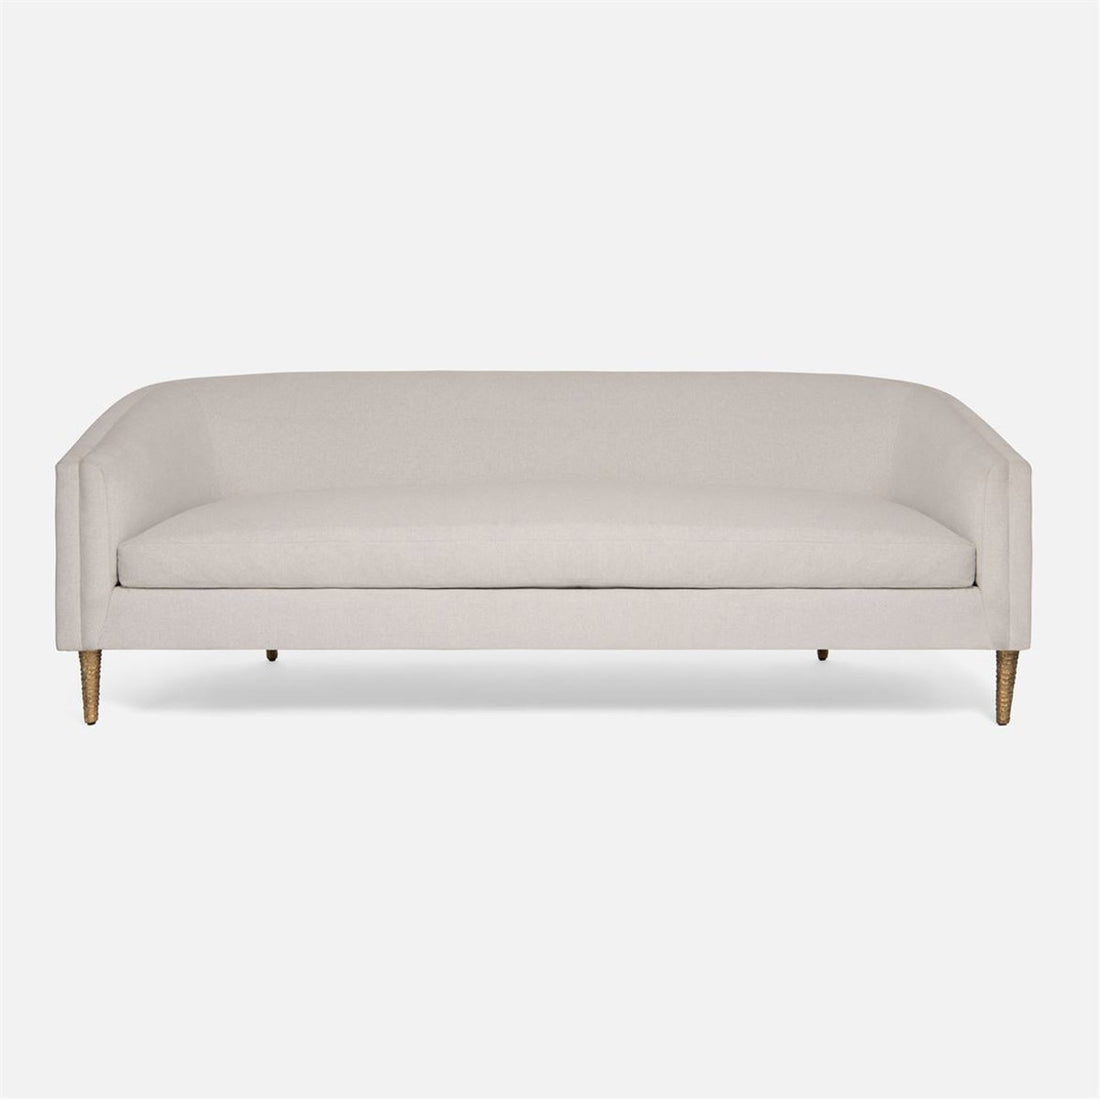 Made Goods Theron Upholstered Curved Back Sofa in Garonne Marine Leather